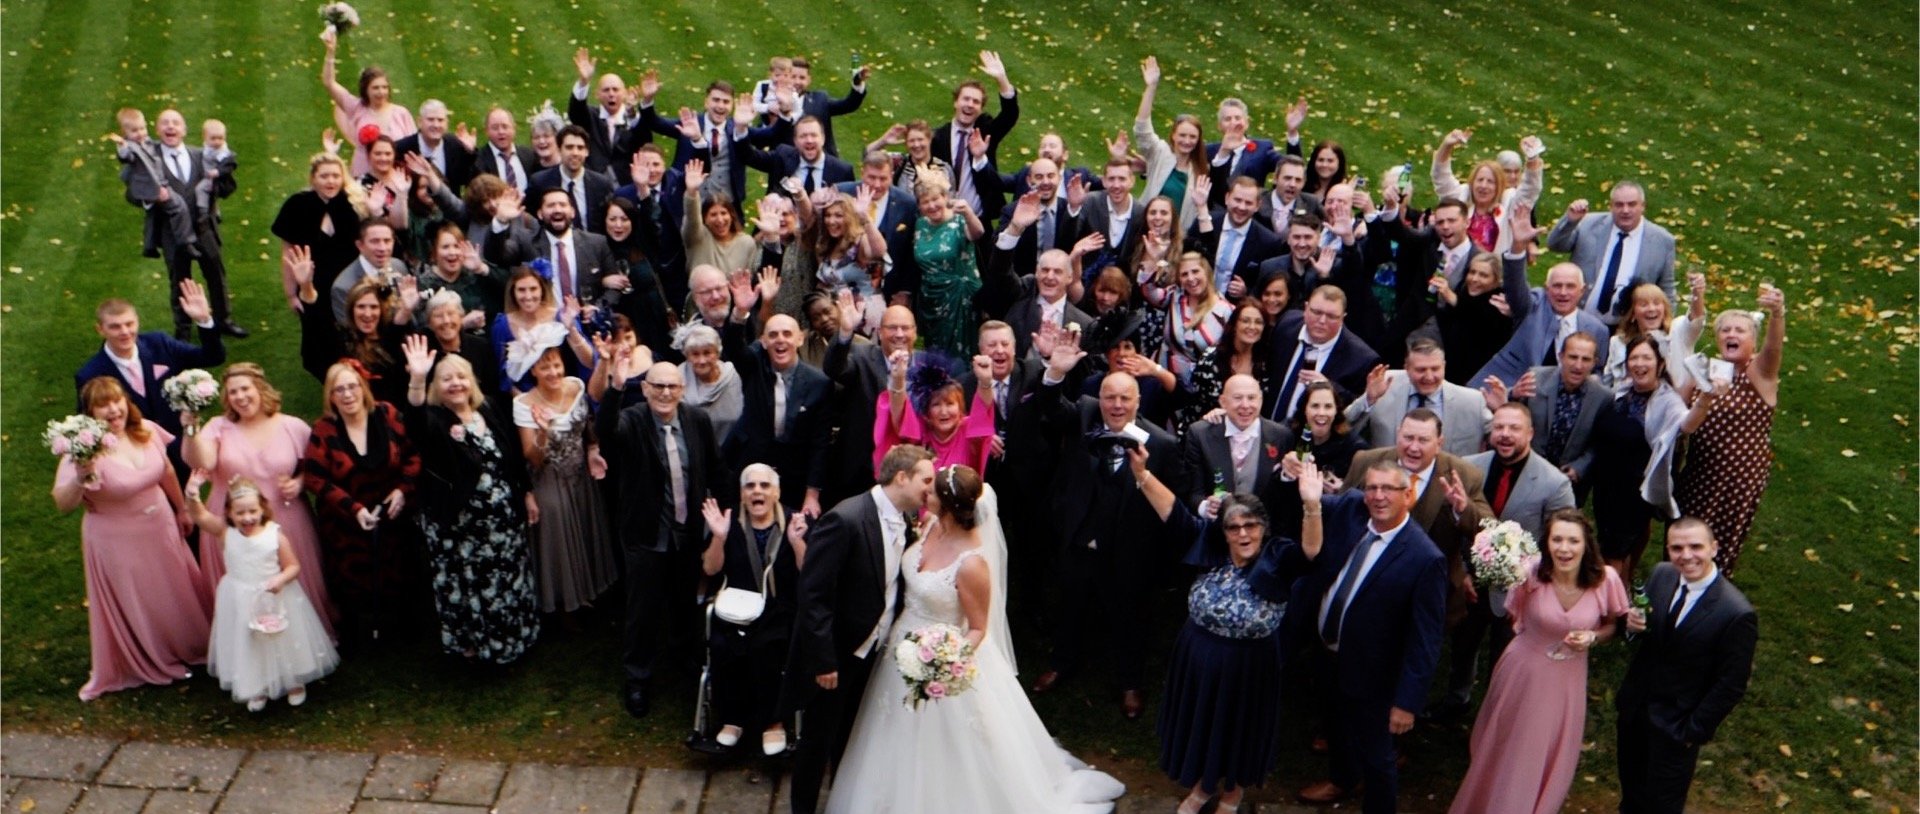 Wedding Party at Mulberry House essex.jpg